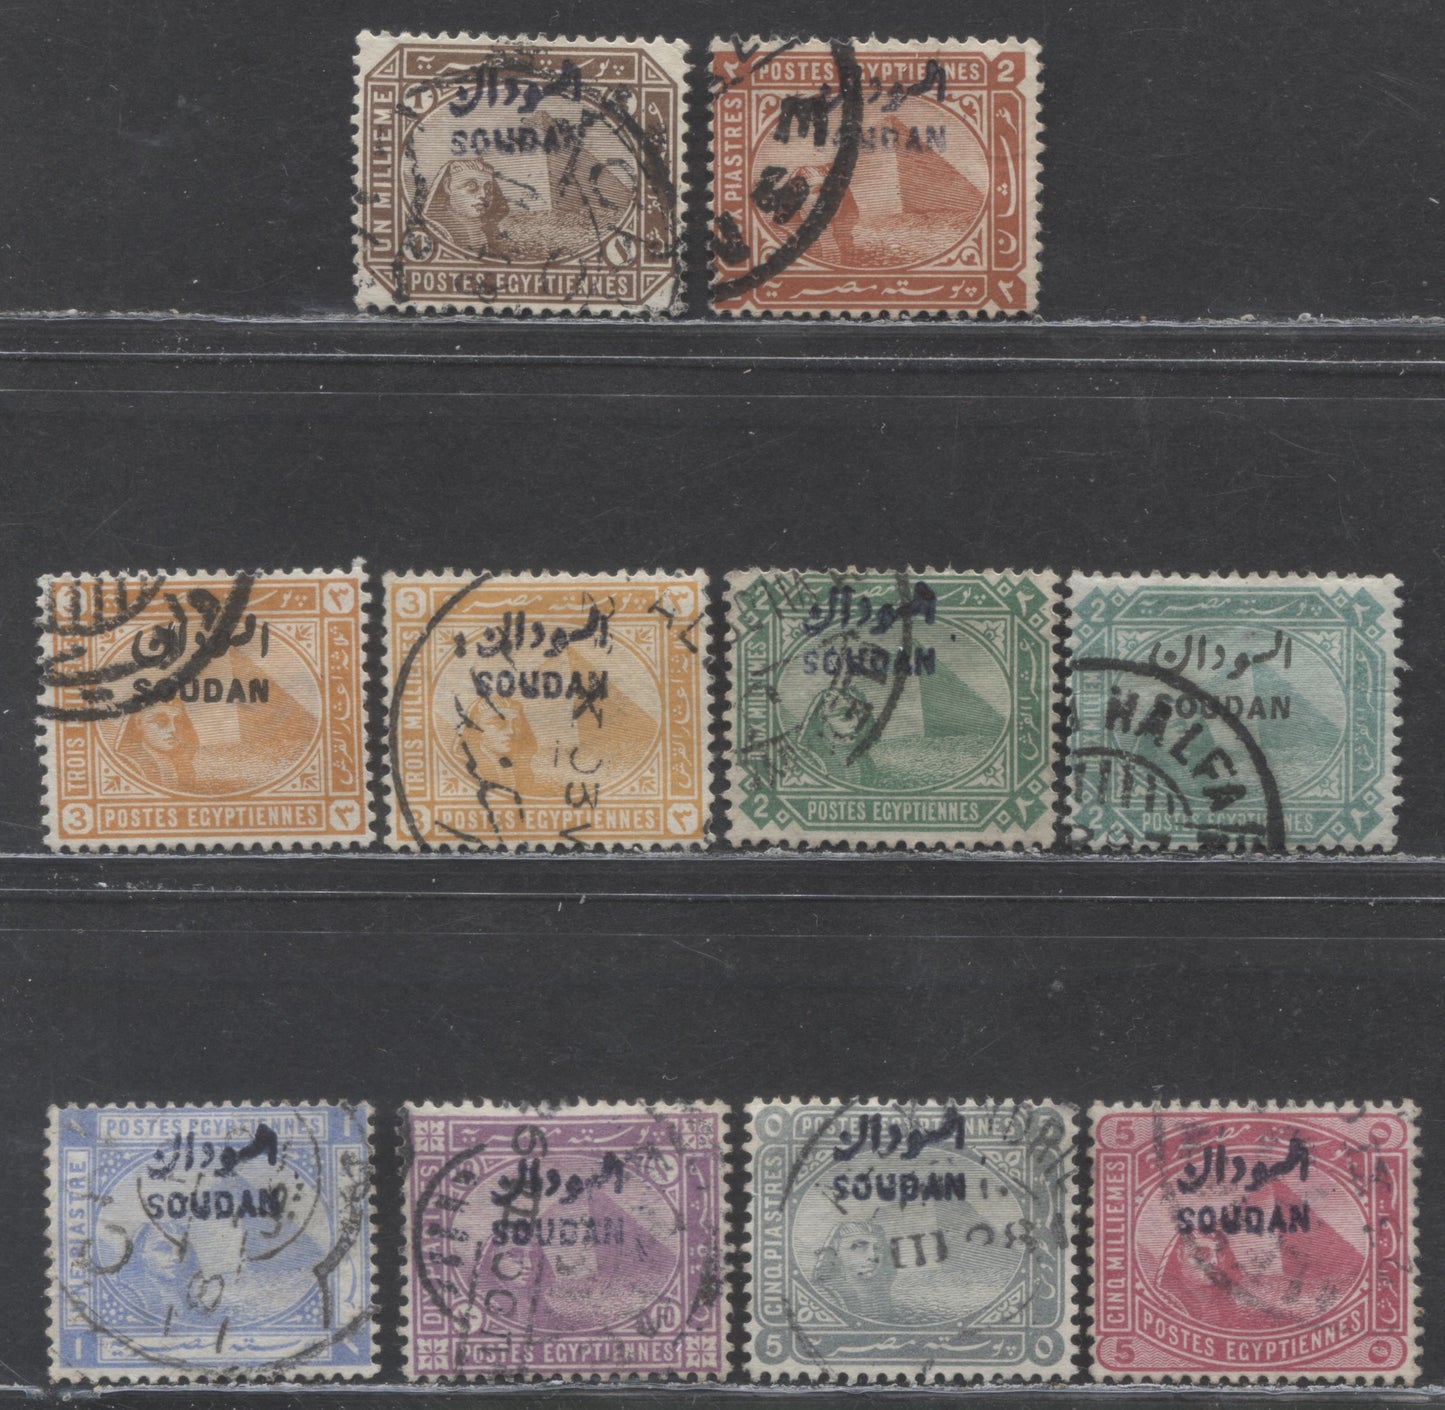 Lot 171 Sudan SC#1-8 1897 Overprints, Forged Overprints, 10 Fine/Very Fine Used Singles, 2022 Scott Classic Cat. $5 USD, Click on Listing to See ALL Pictures, Estimated Value $5 USD